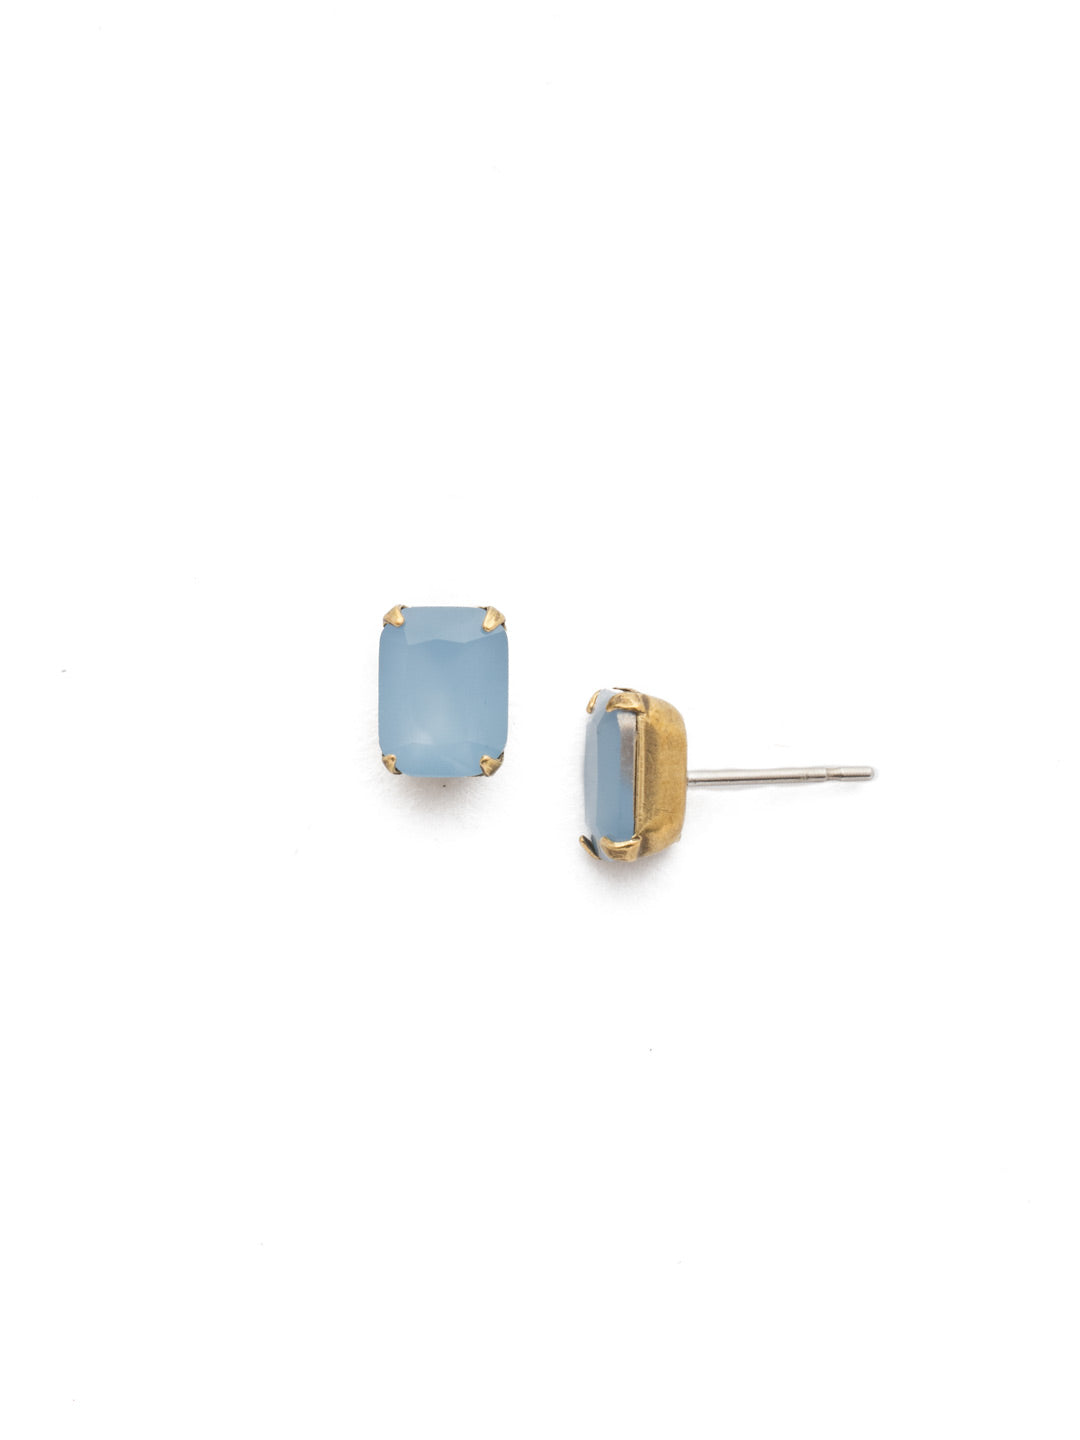 Mini Emerald Cut Stud Earrings - EBY42AGABO - <p>Simply sophisticated. The mini emerald cut stud earrings can be worn alone or paired with anything for an extra accent to any wardrobe. From Sorrelli's Air Blue Opal collection in our Antique Gold-tone finish.</p>